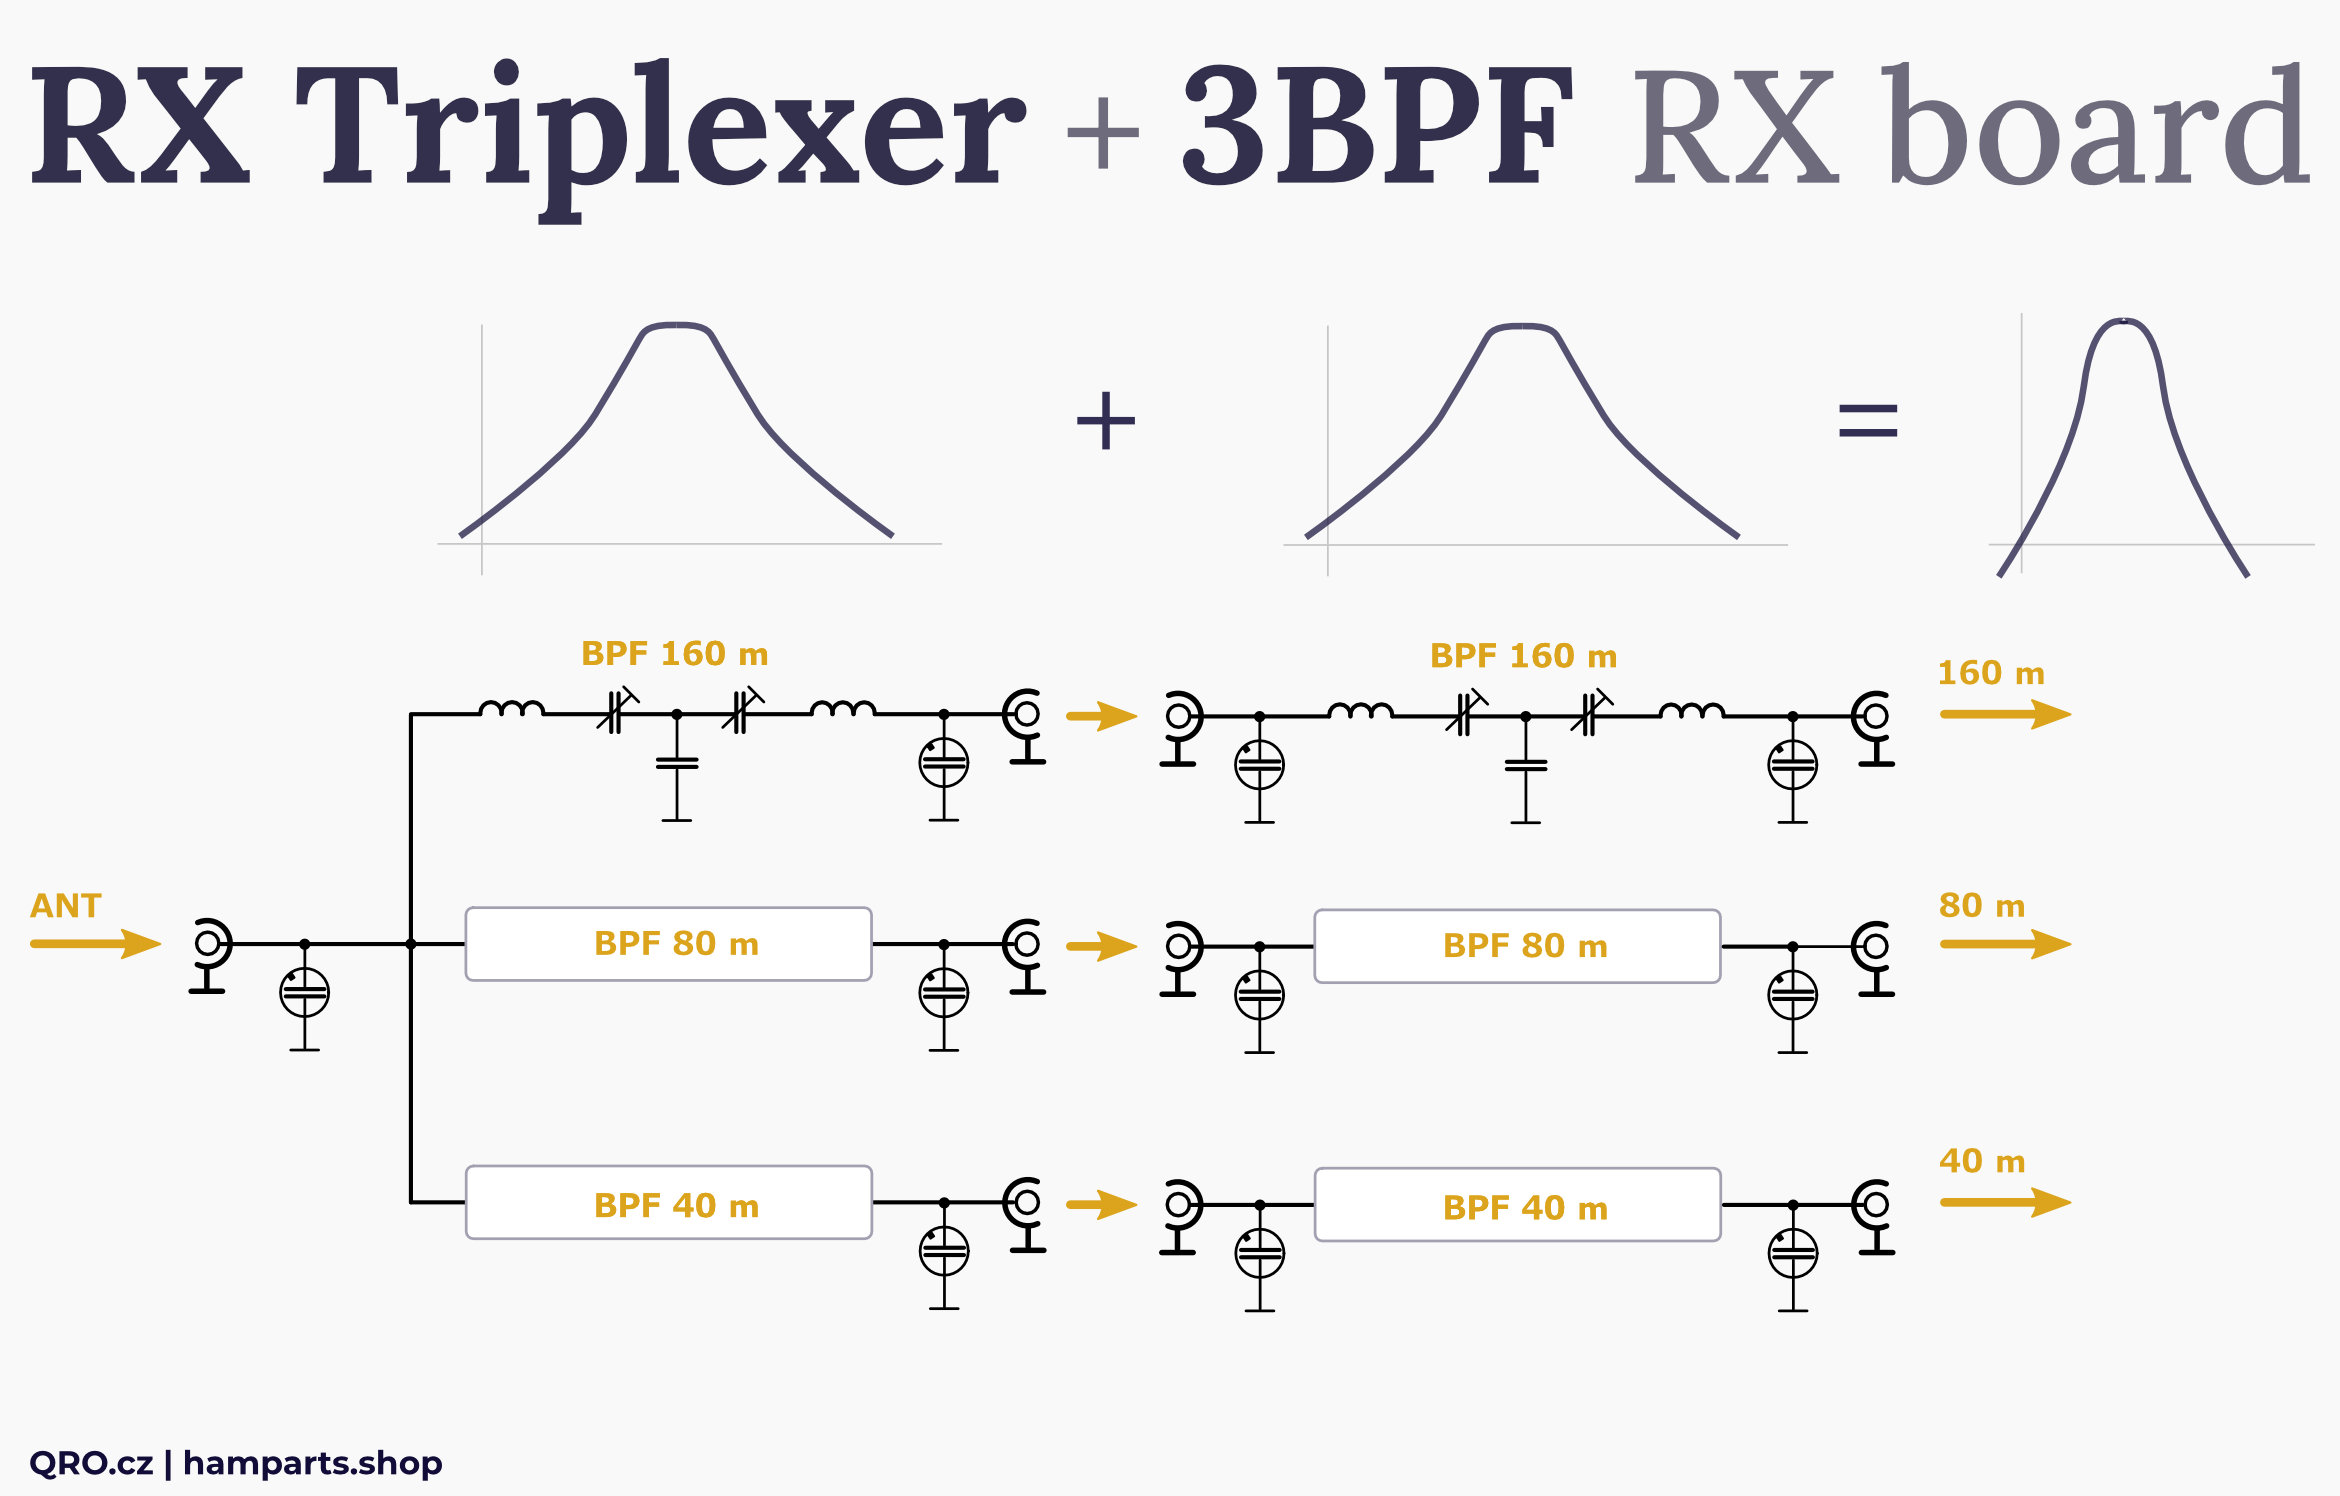 effect of 3bpf with rx triplexer by qro.cz hamparts.shop